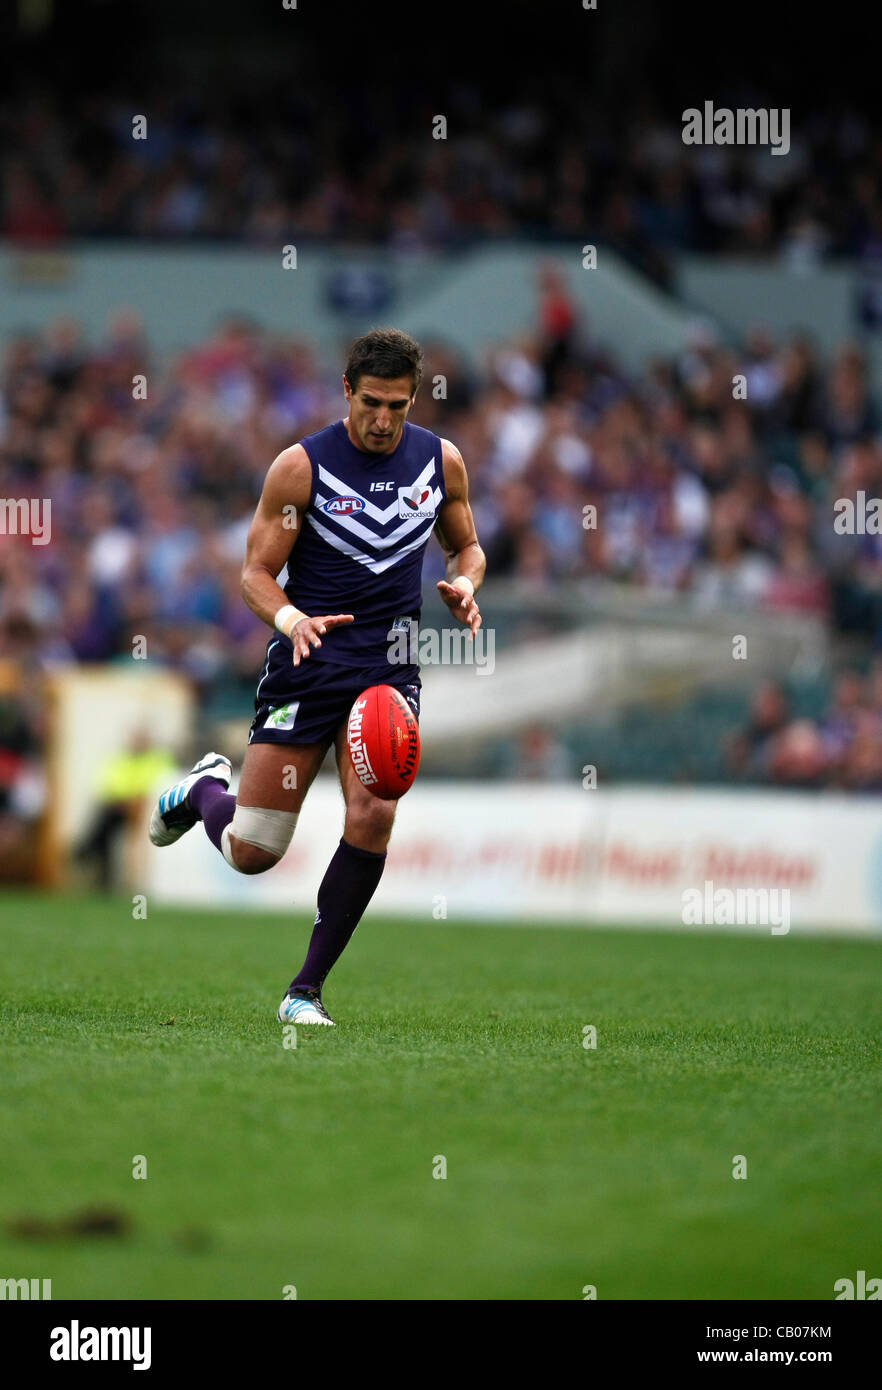 13.05.2012 Subiaco, Australia. Fremantle v Port Adelaide. Matthew Pavlich goes for a run with the ball during the Round 7 game played at Patersons Stadium. Stock Photo